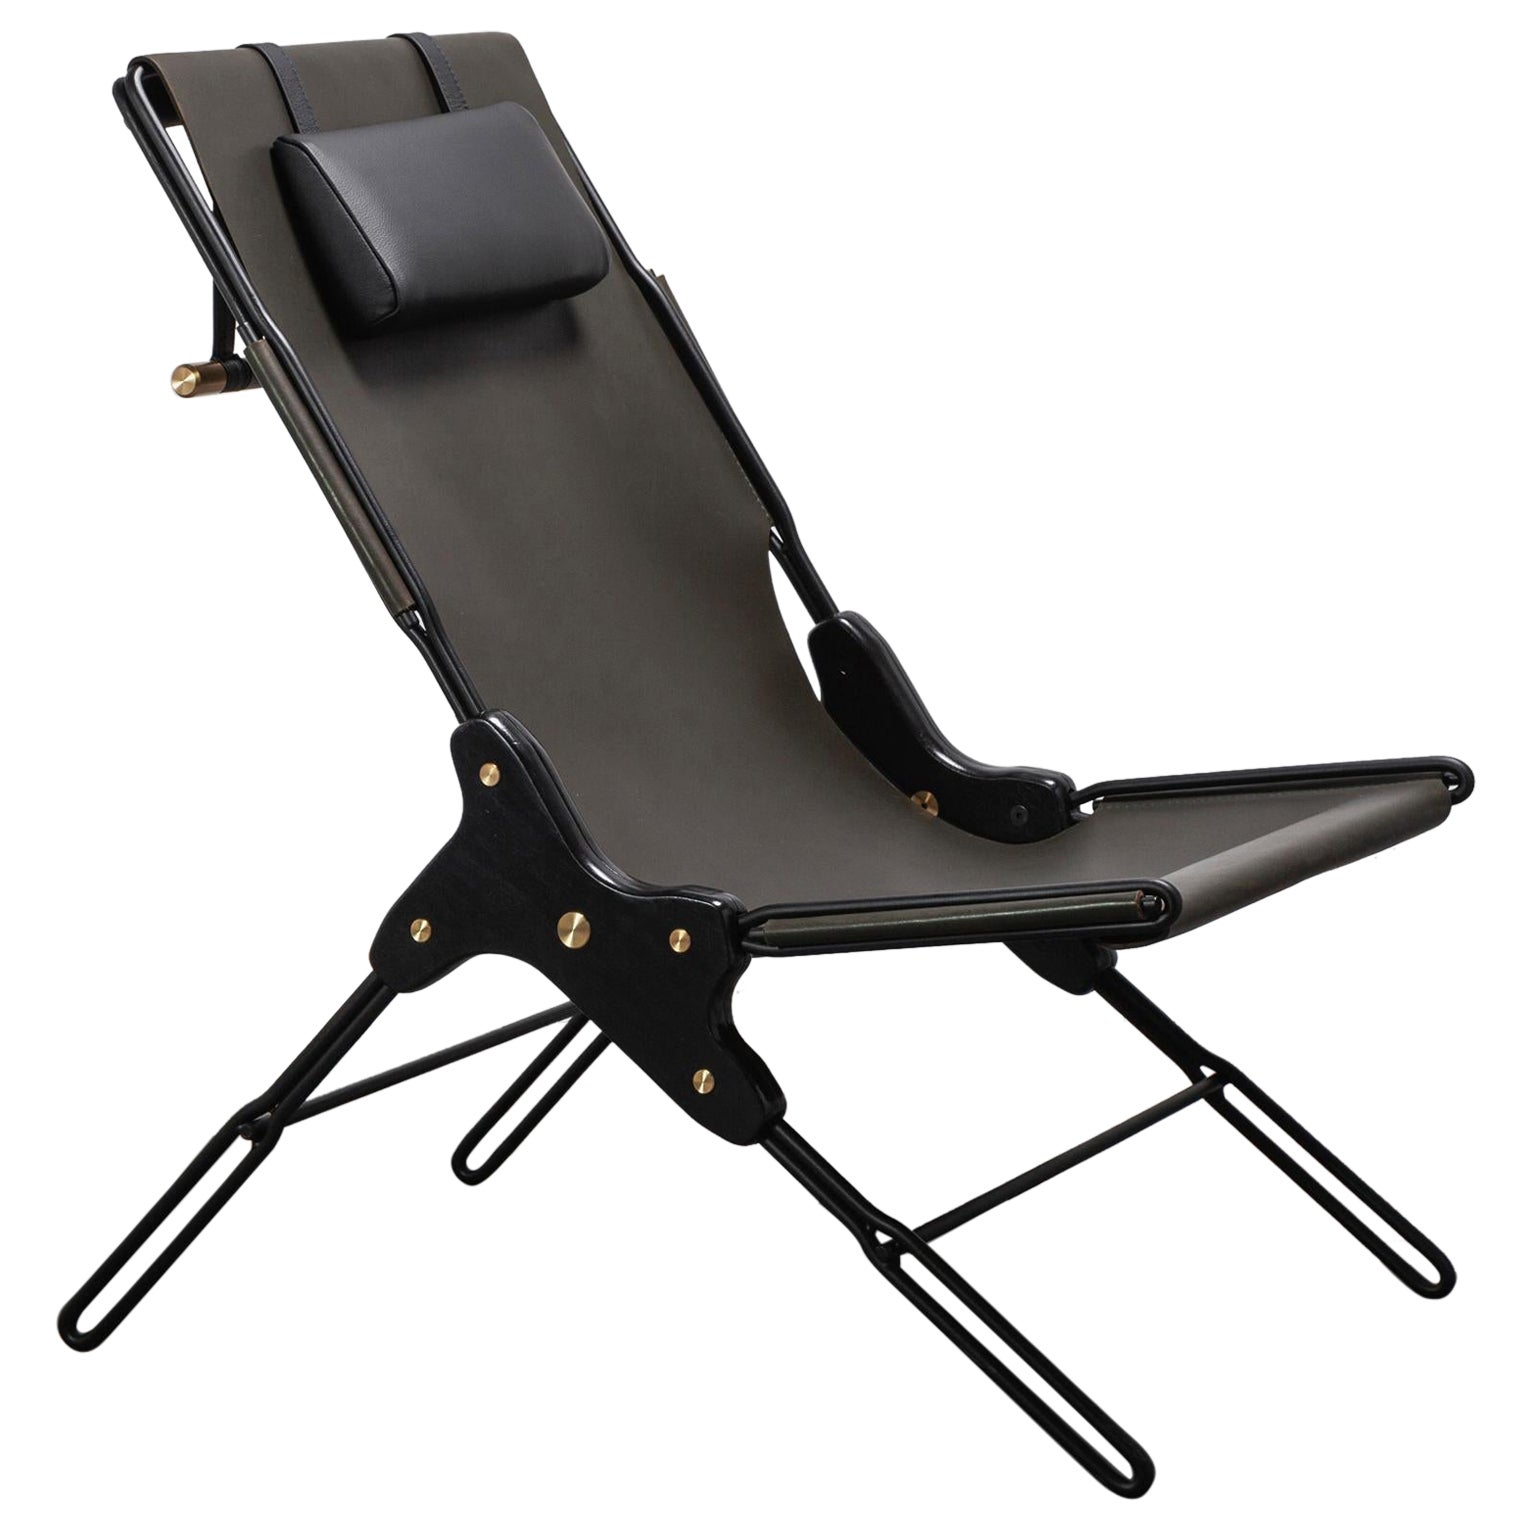 PERFIDIA_01 Olivo Thick Leather Sling Lounge Chair in Black Steel by ANDEAN